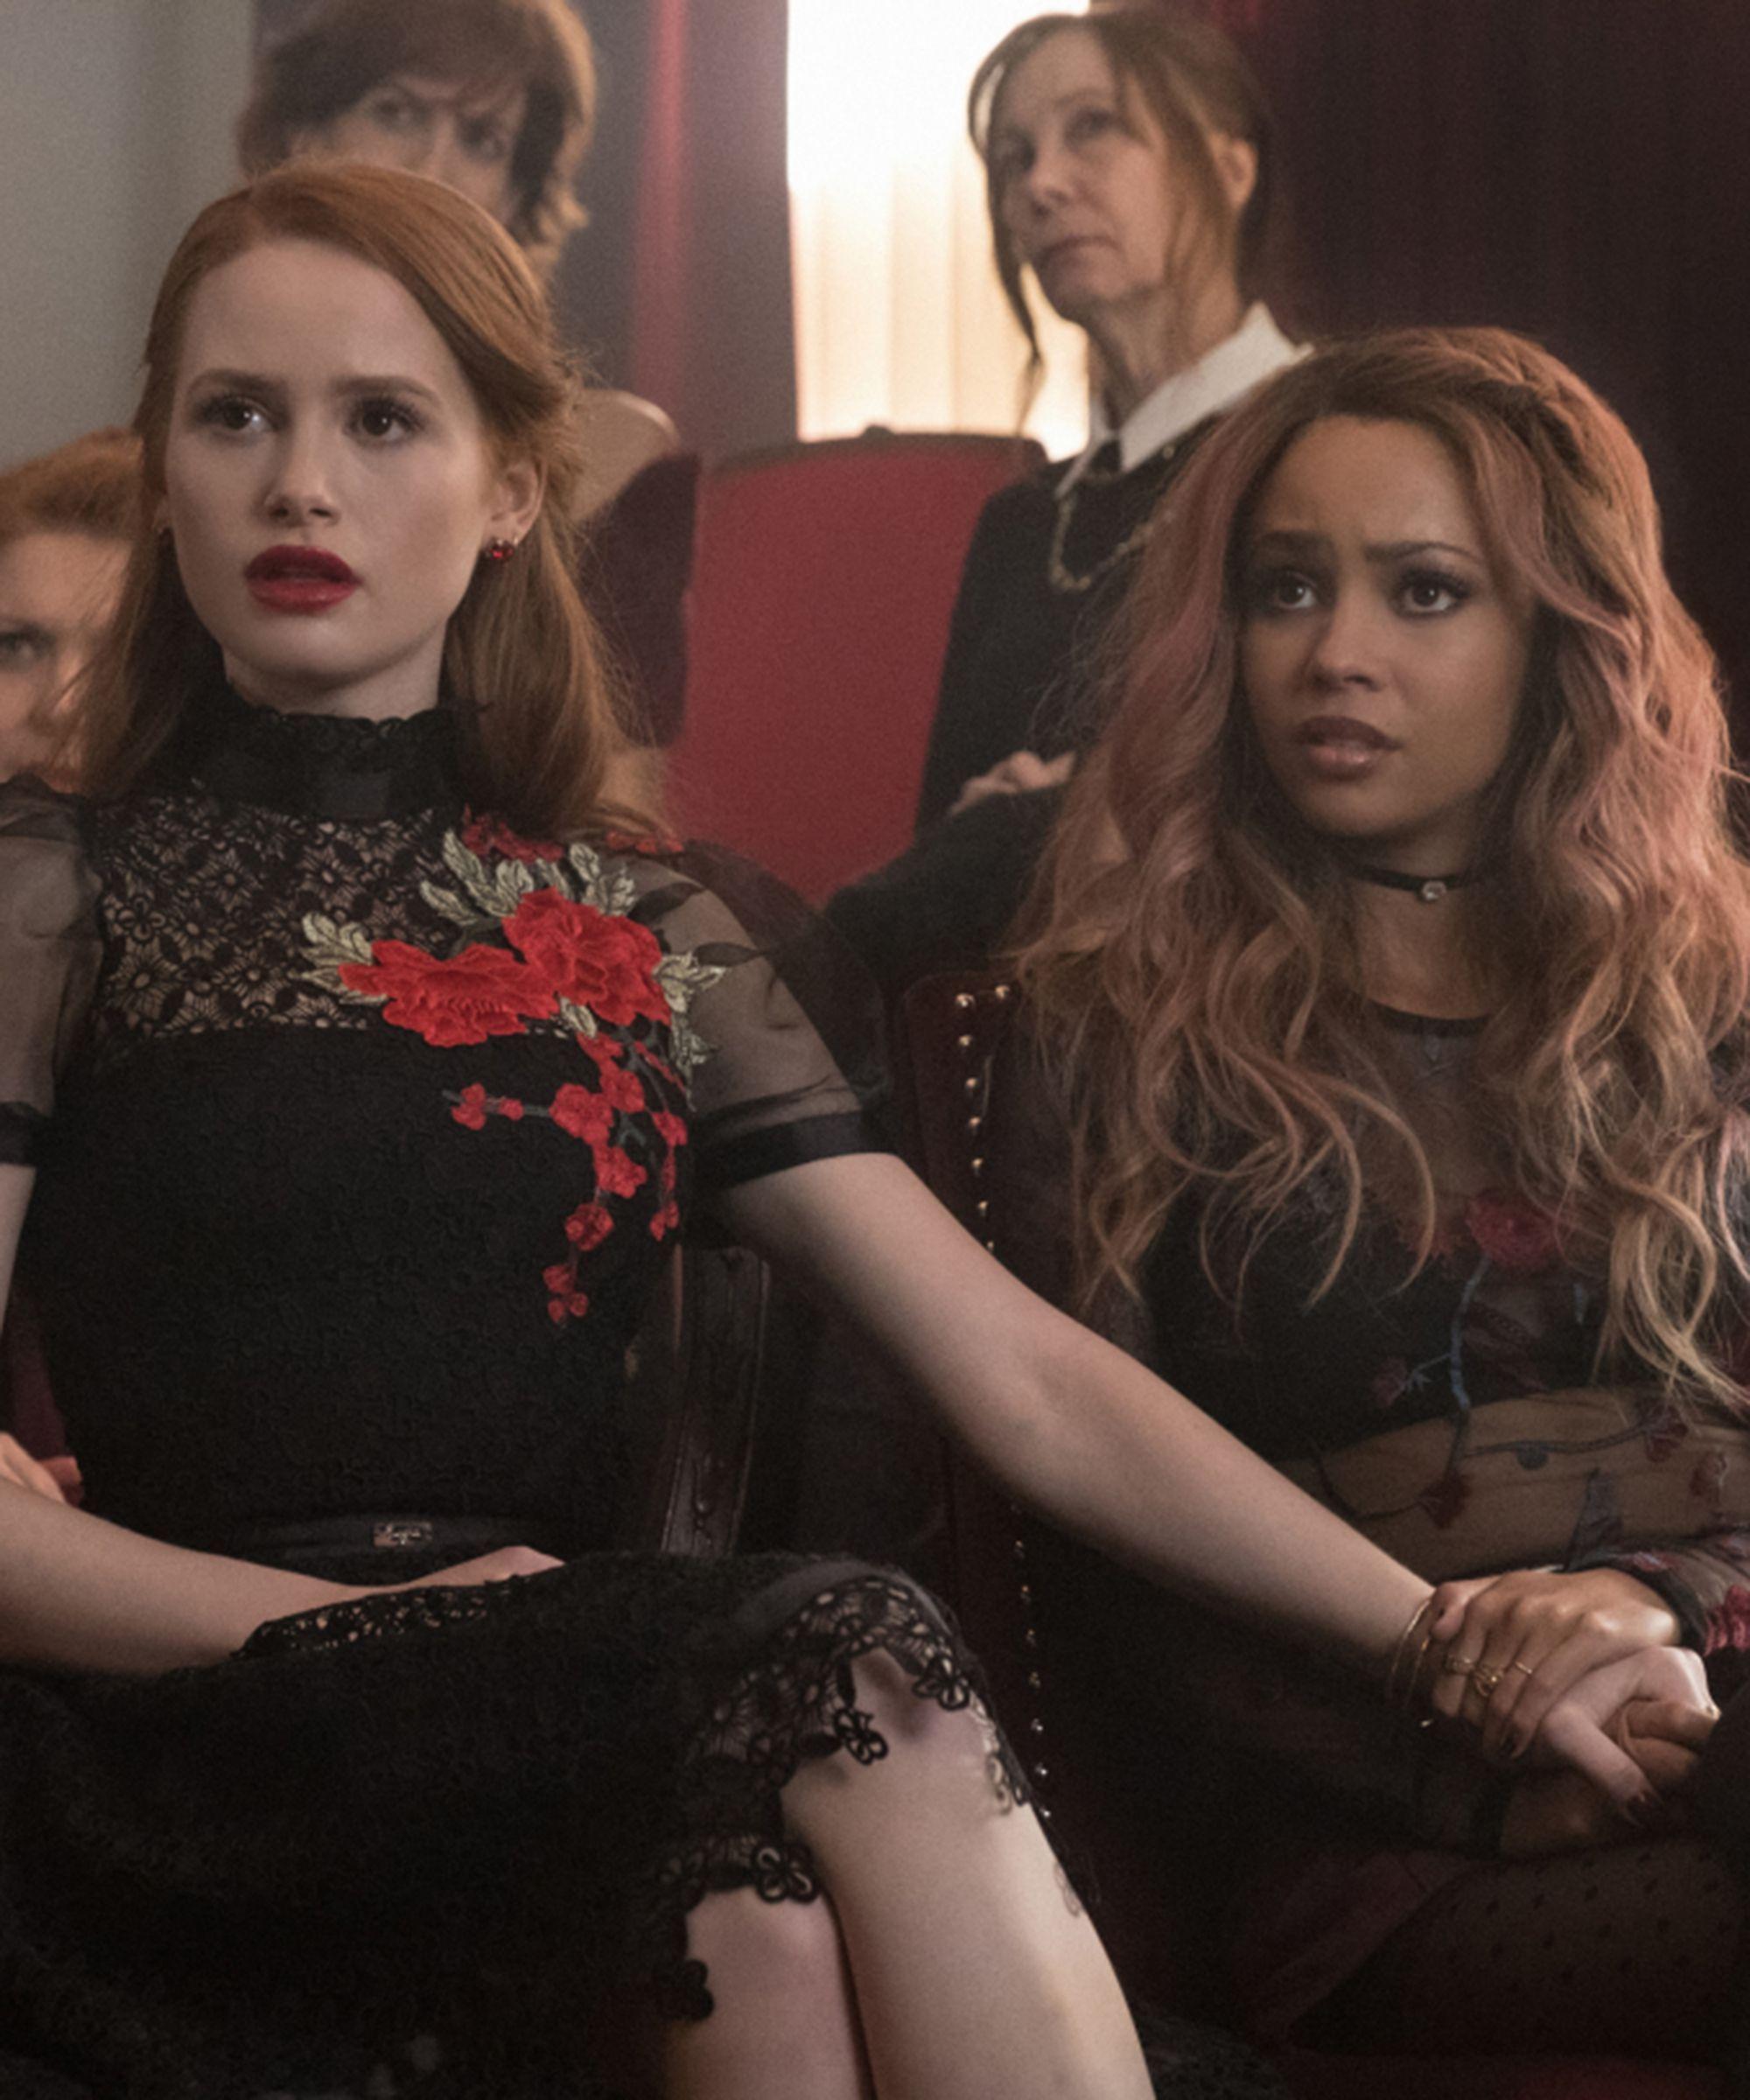 Choni Episode Gives Riverdale Its Best, Kiss